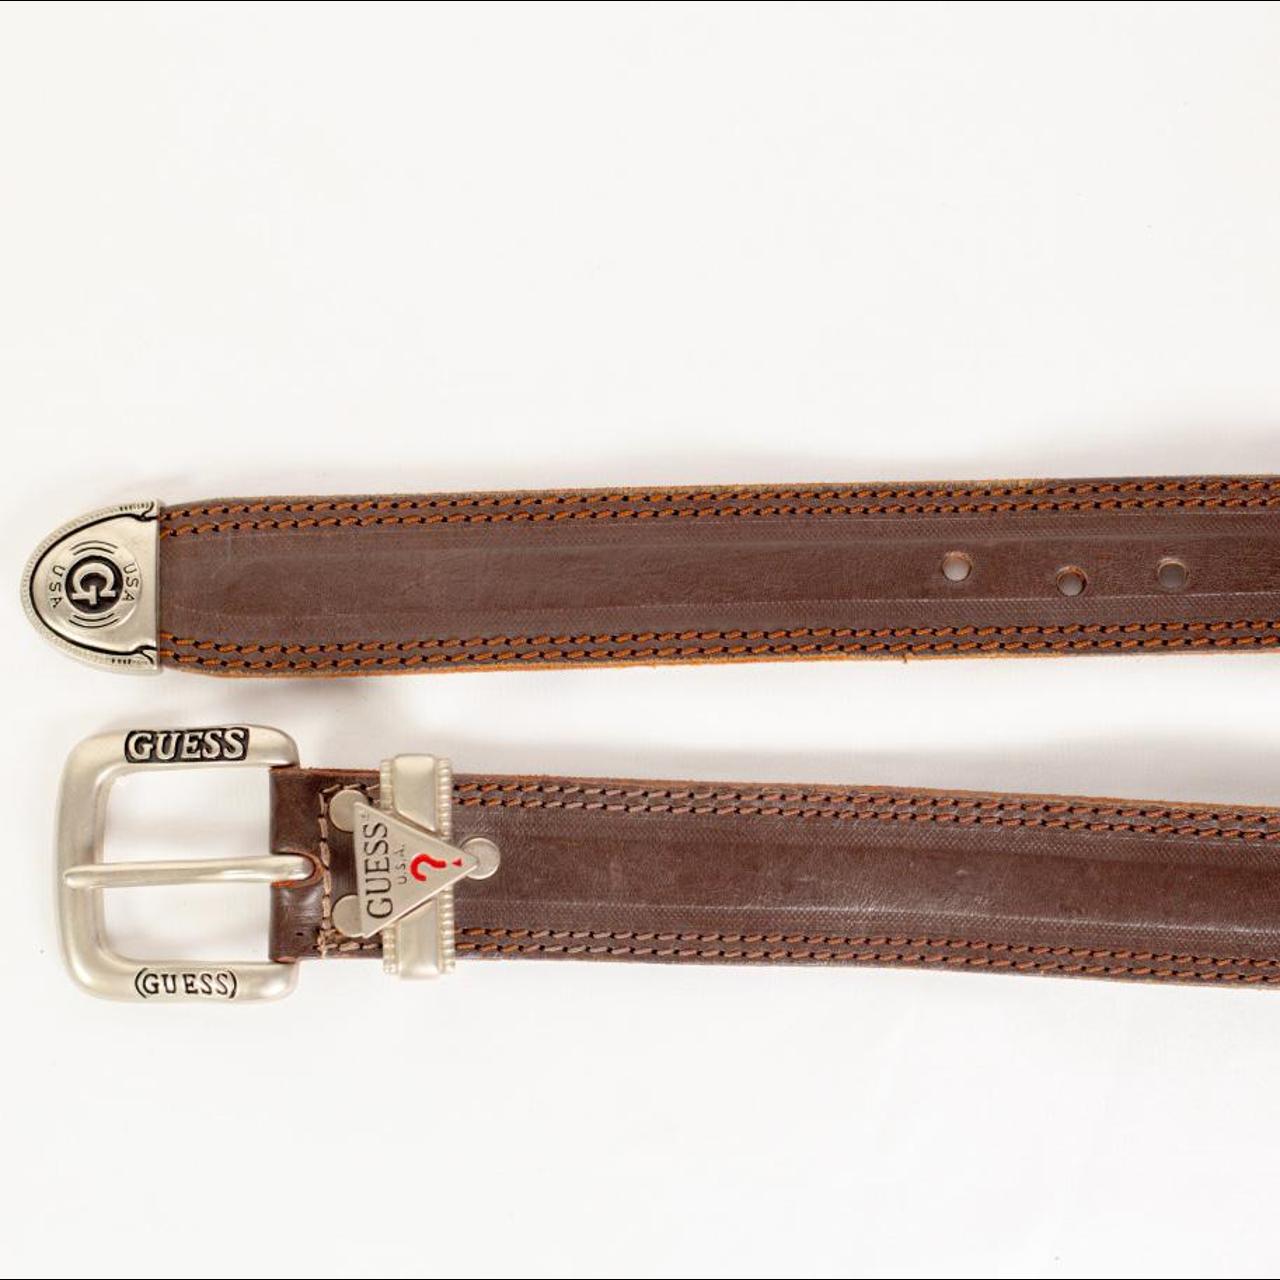 Product Image 3 - LEATHER GUESS BELT
2k Brown leather